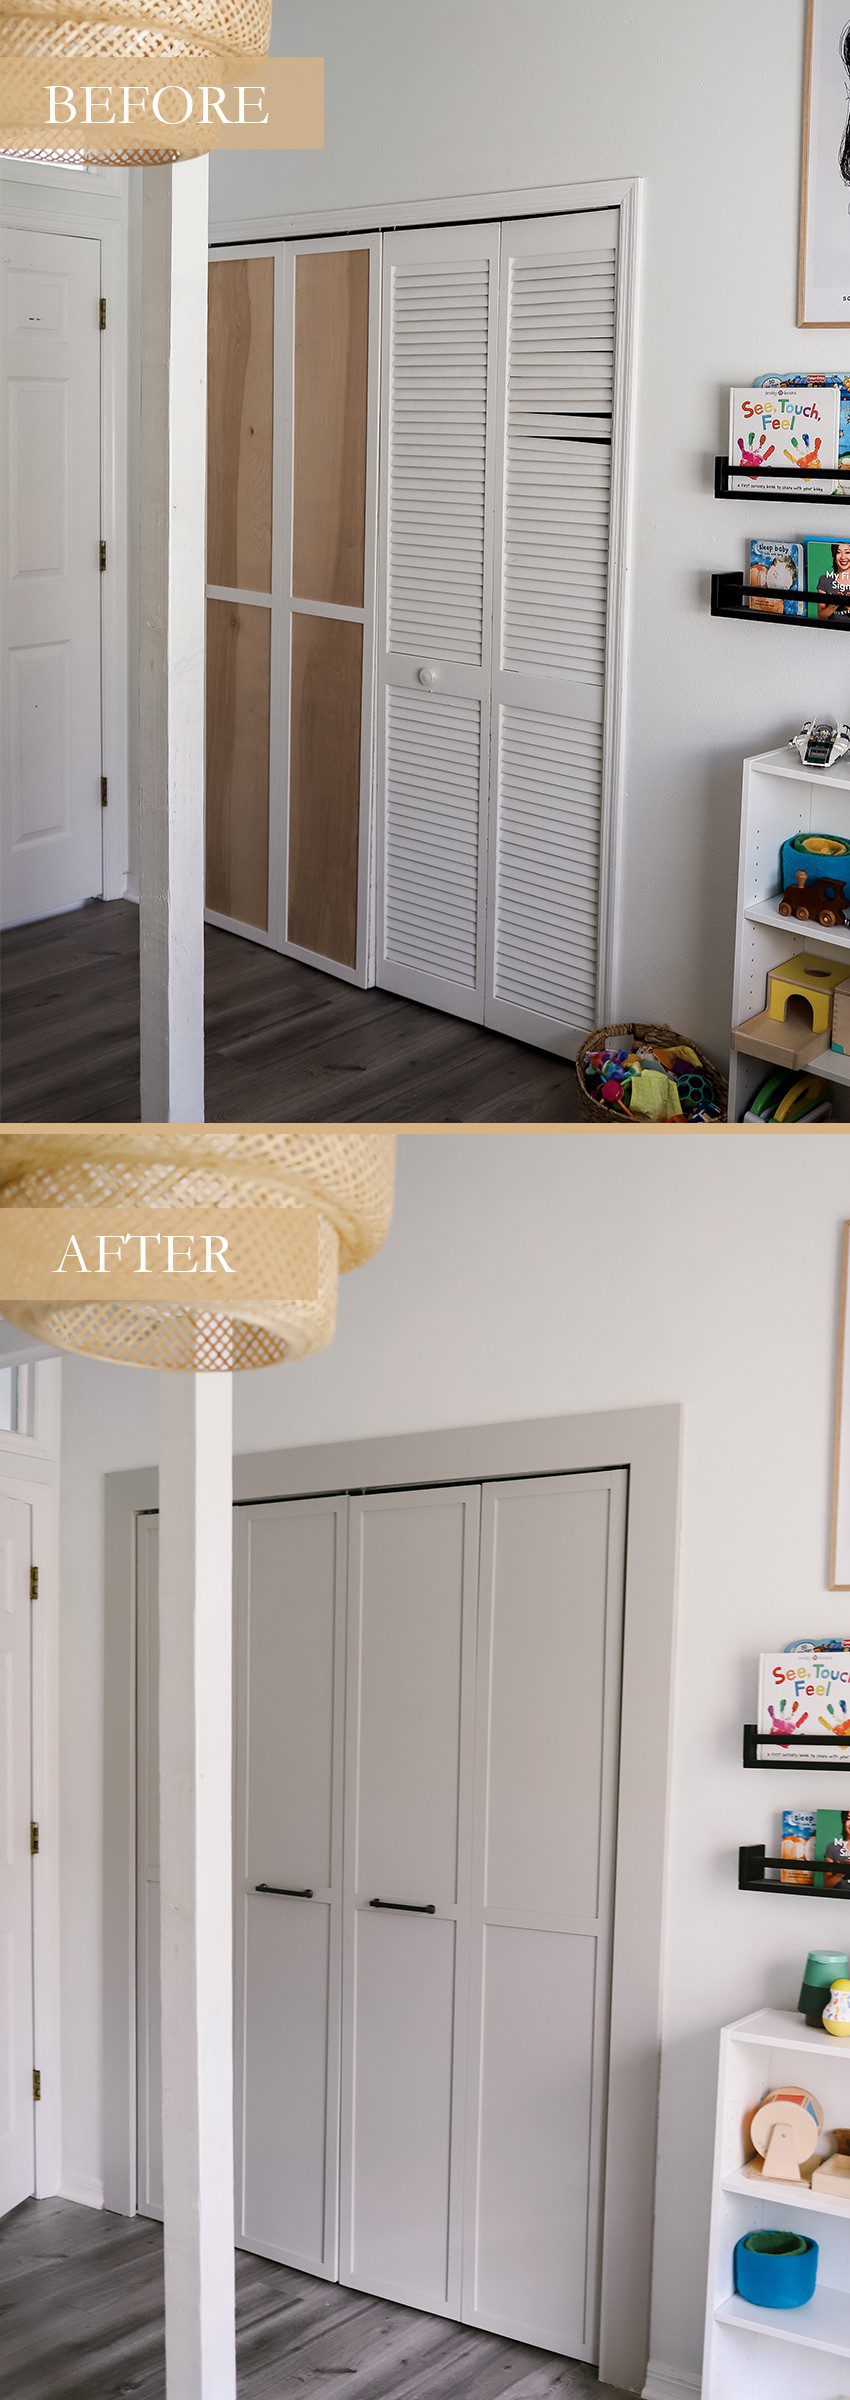 Home Refresh Ideas: DIY Closet Door Upgrade Tutorial. How to update Bi-fold closet doors on a budget. Easy how-to for updating old bifold closet doors and save money (save the hundreds it would cost to replace them!). | DIY Closet Door by popular Florida lifestyle blog, Fresh Mommy Blog: before and after image of bifold closet doors. 